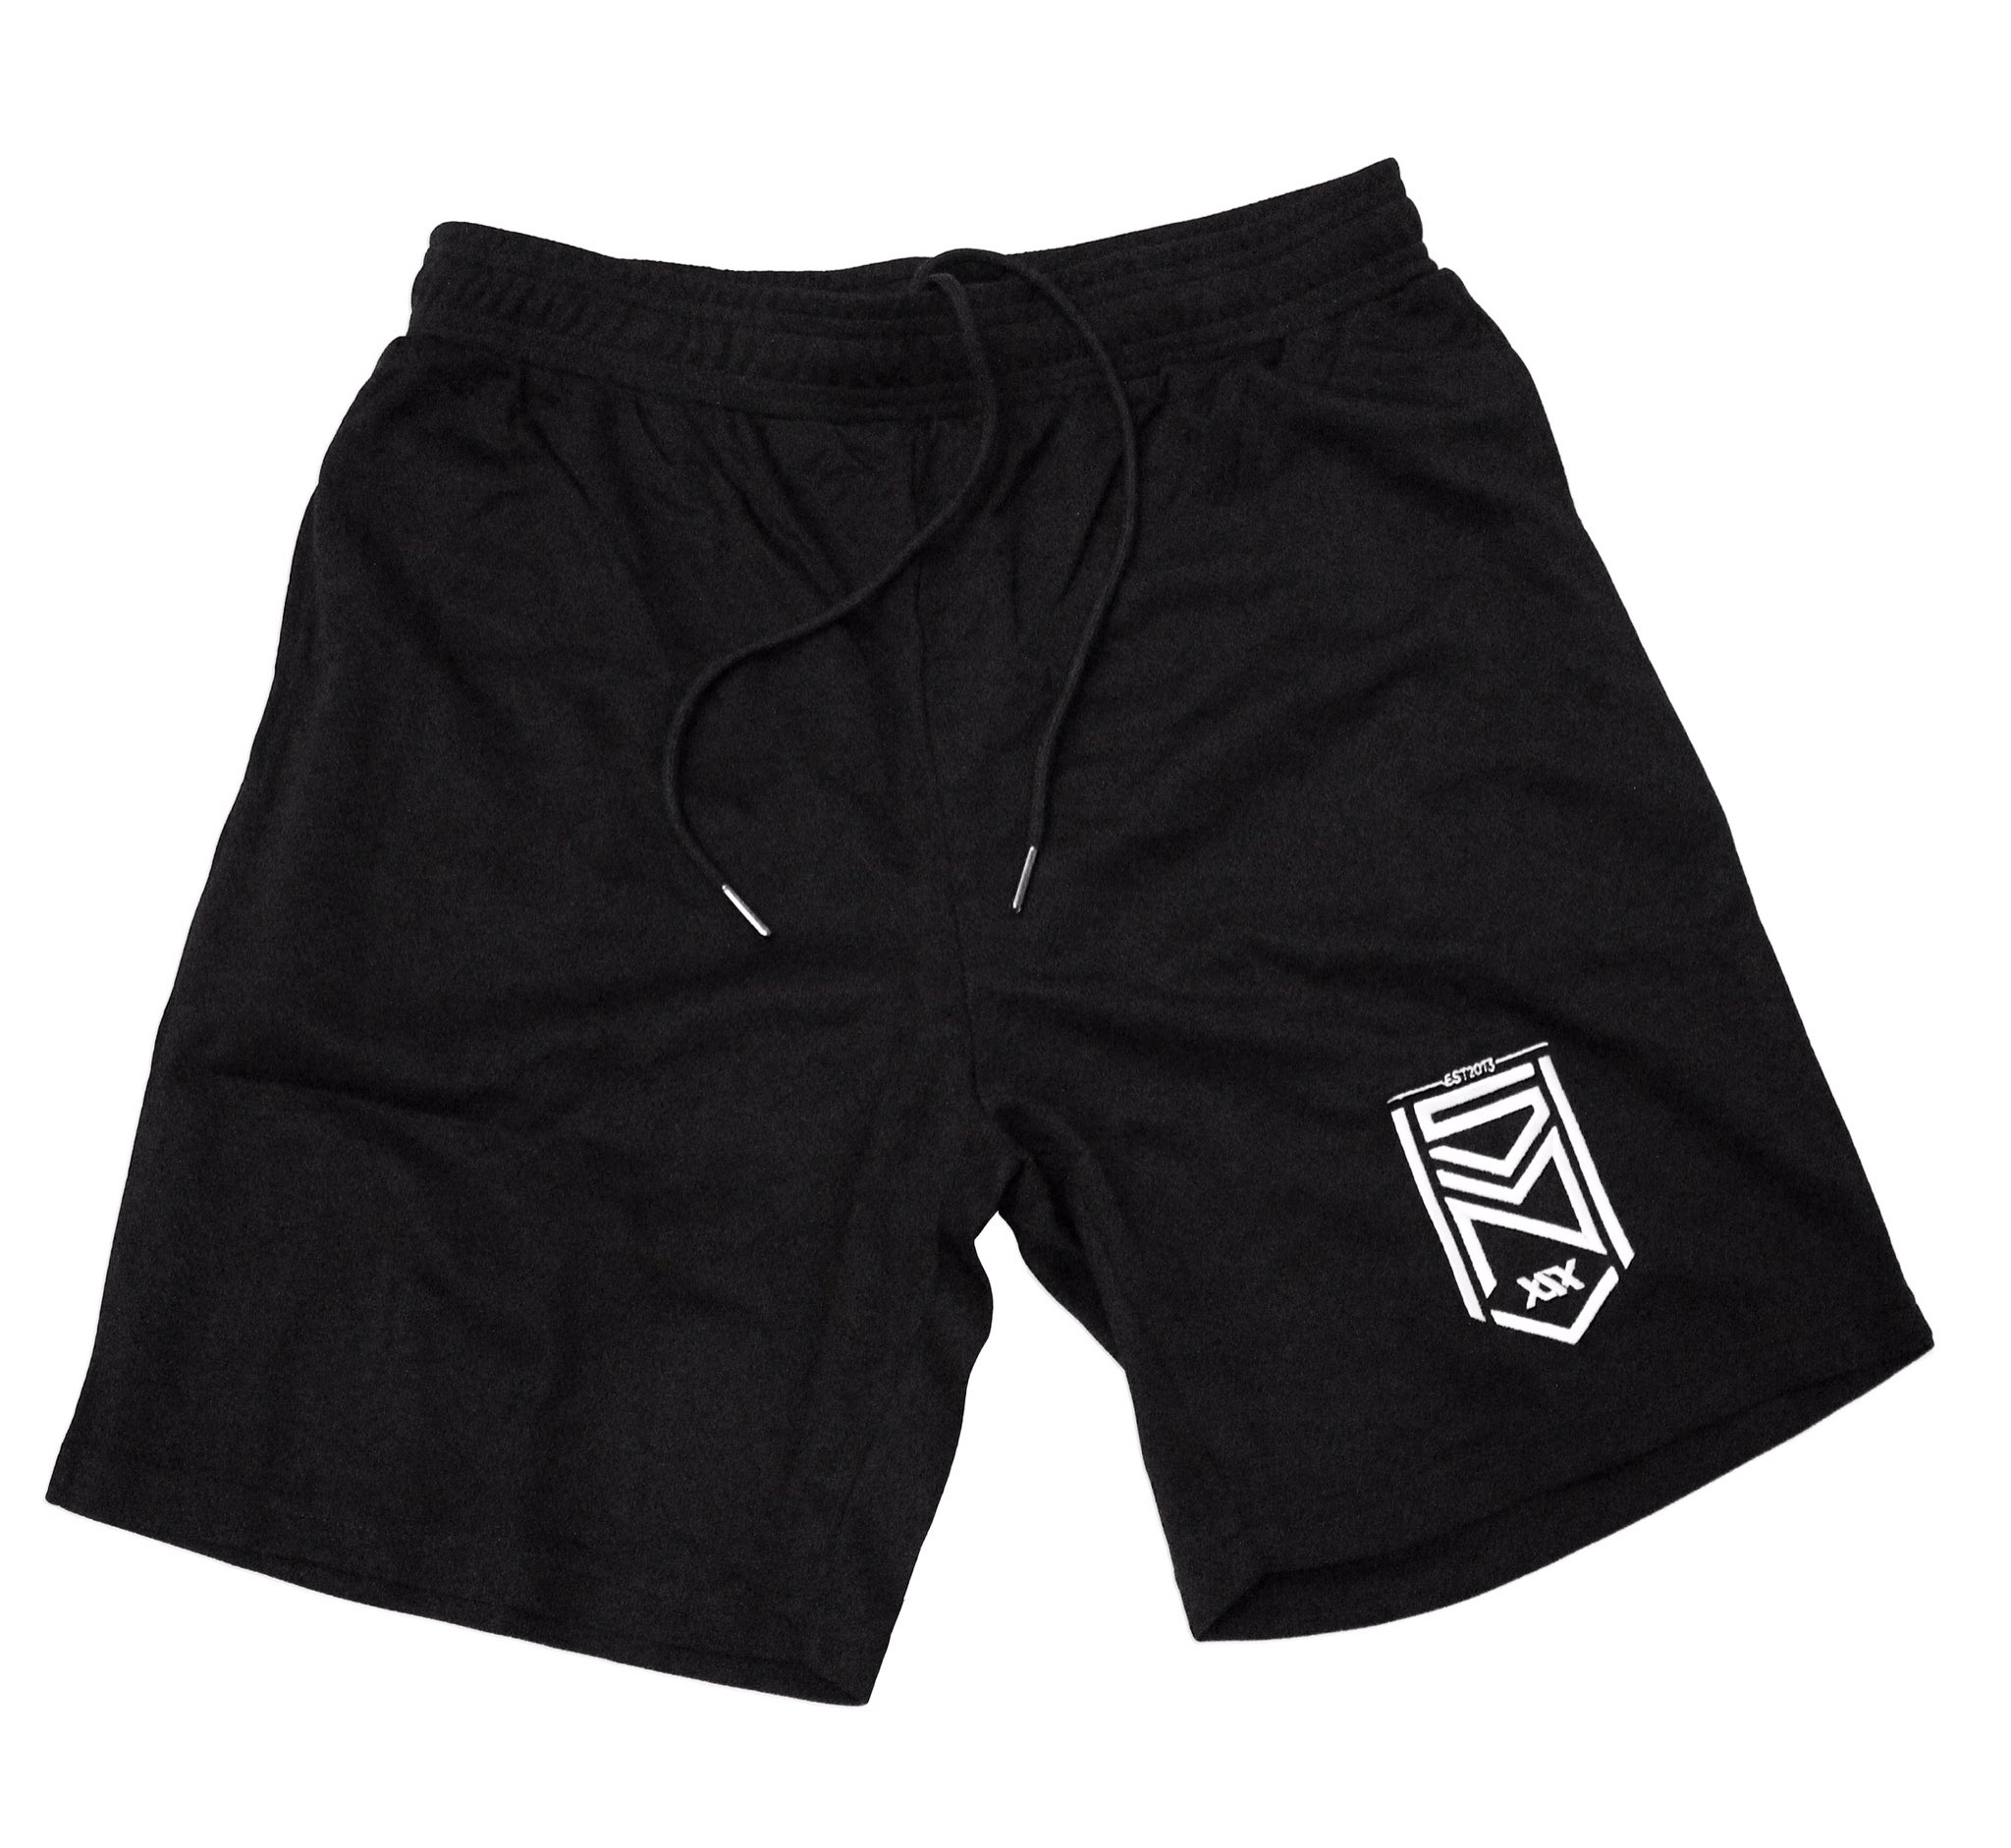 Sidemen Clothing on X: "NEW RELEASES: Crest logo football shorts SDMN lounge shorts coming to Sidemen Clothing tomorrow at 6pm! 🙌 https://t.co/kdtc7JohEF https://t.co/EOGKemePXI" /